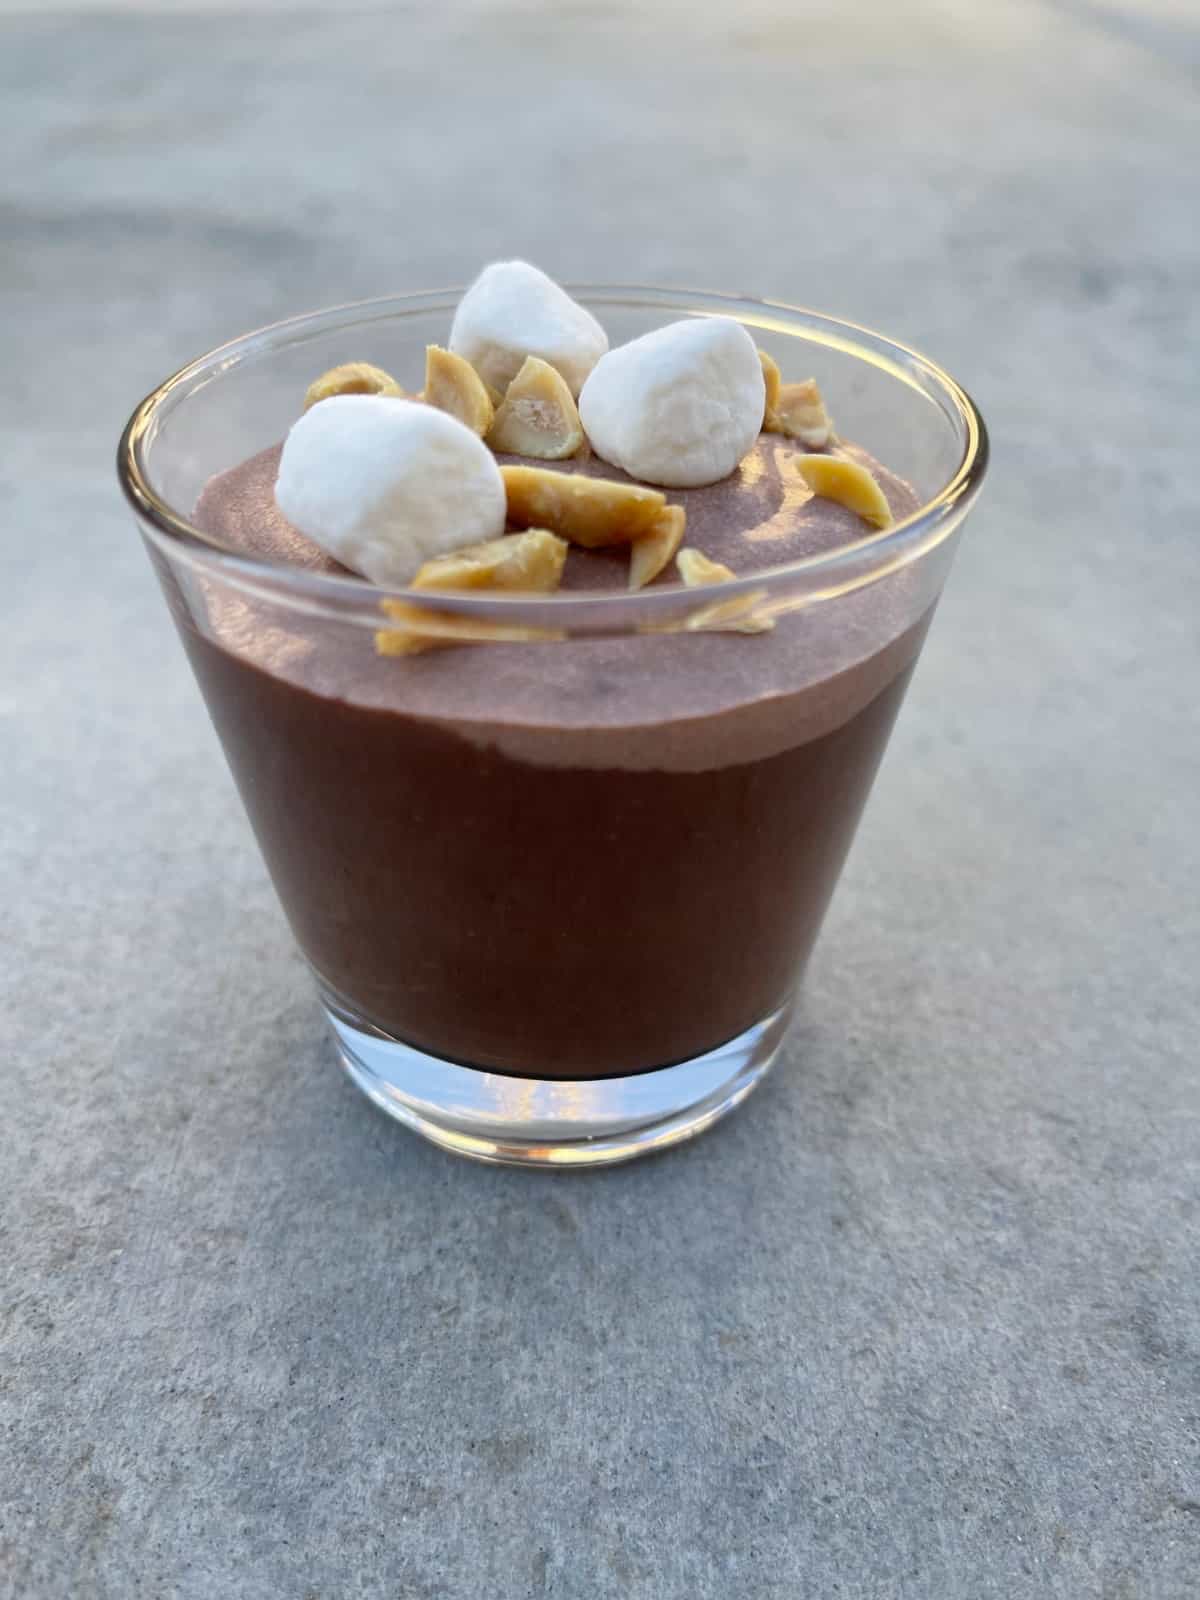 Rocky Road Pudding Parfait topped with mini marshmallows and chopped peanuts.